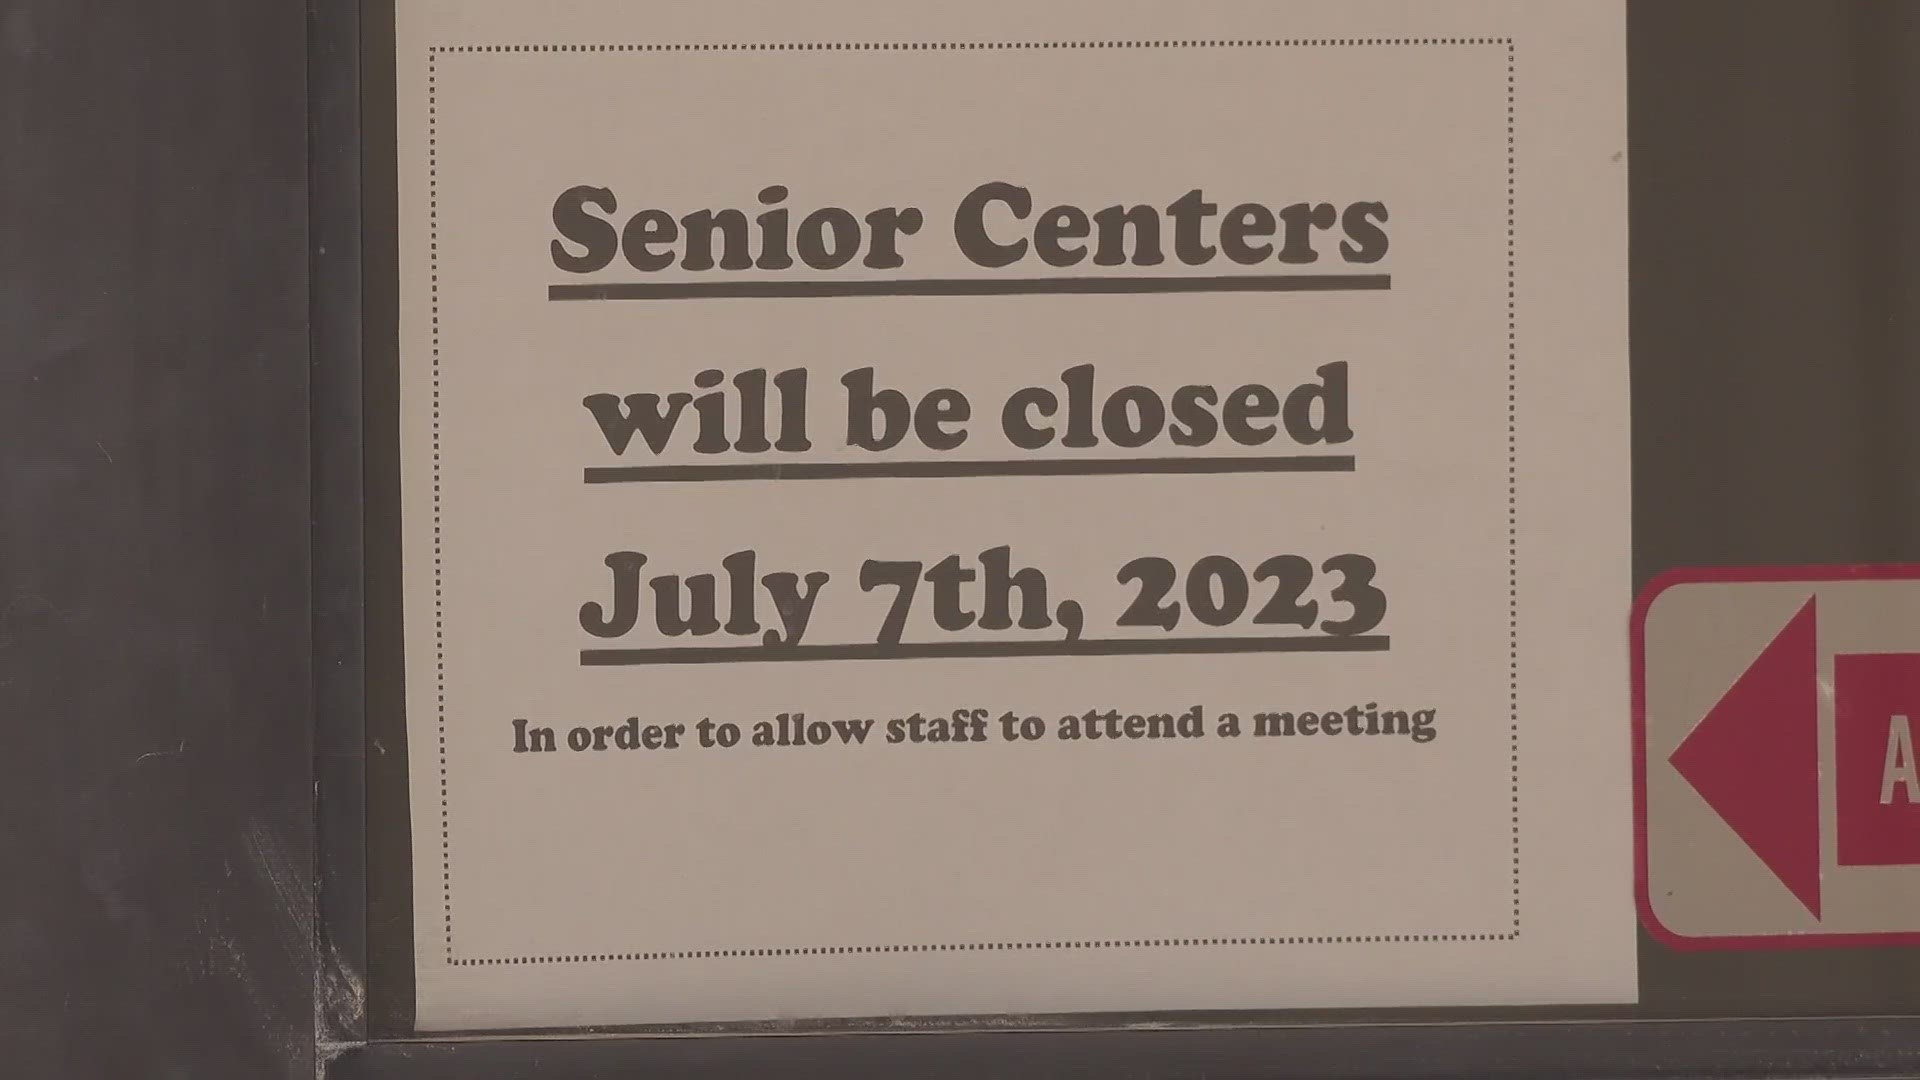 Both the Midland Senior Citizens Center and Southeast Senior Center will be holding staff meetings during the closure.